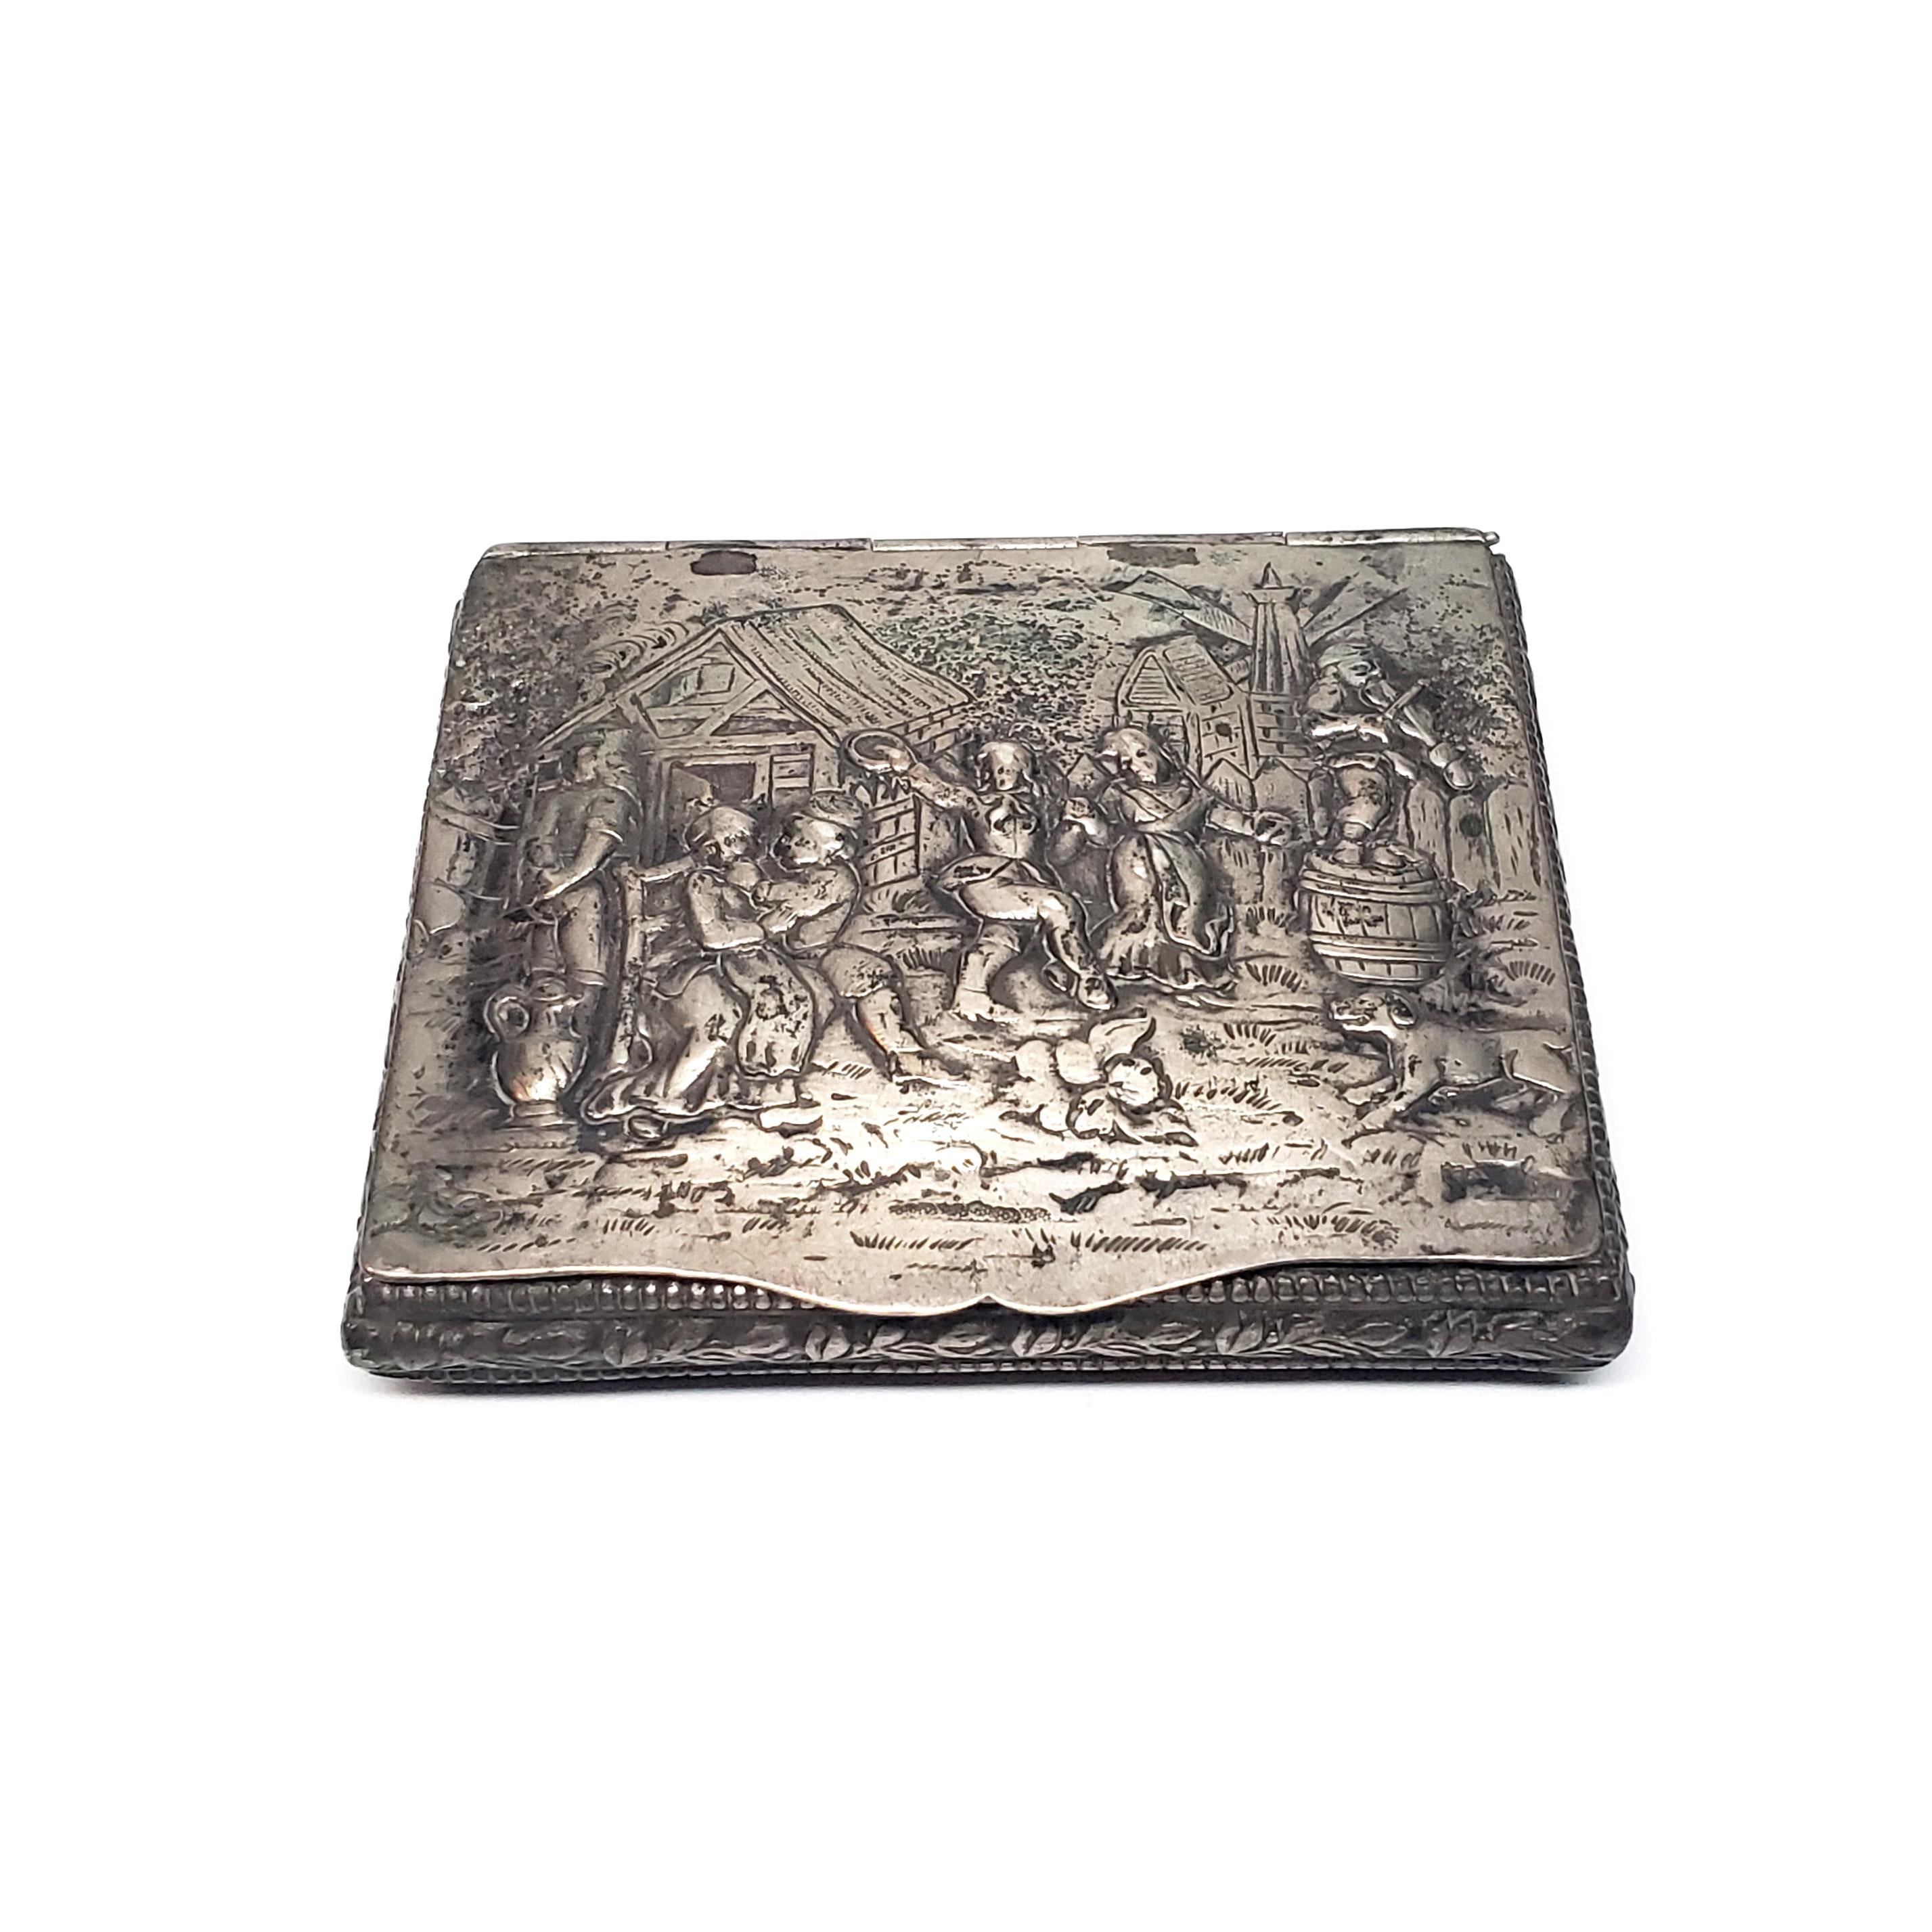 Antique German 800 silver hinged cigarette box.

This is a beautiful example of German Hanau silver, this box could have been used for cigarettes, or cards. The lid depicts a village scene of dancing and music making. Leaf and beaded design all